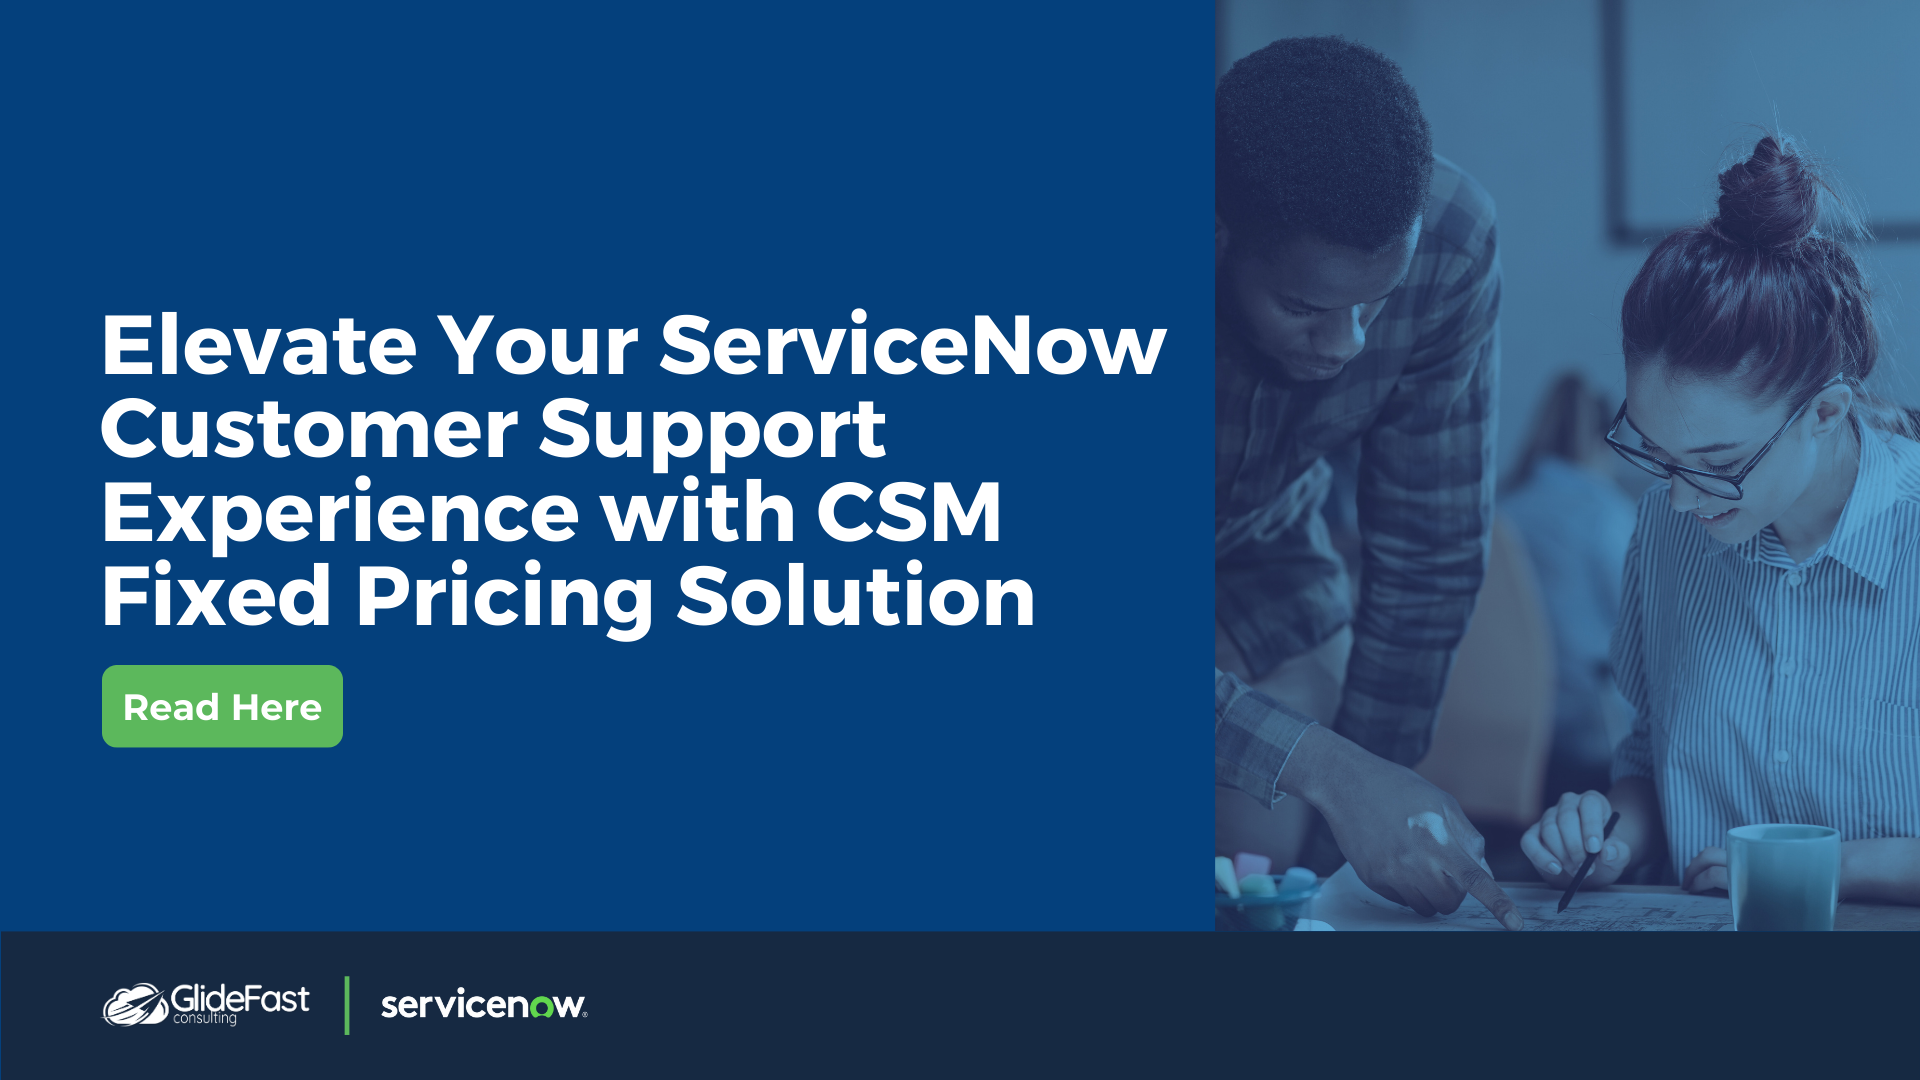 Elevate Your ServiceNow Customer Support Experience with CSM Fixed Pricing Solution by GlideFast Consulting